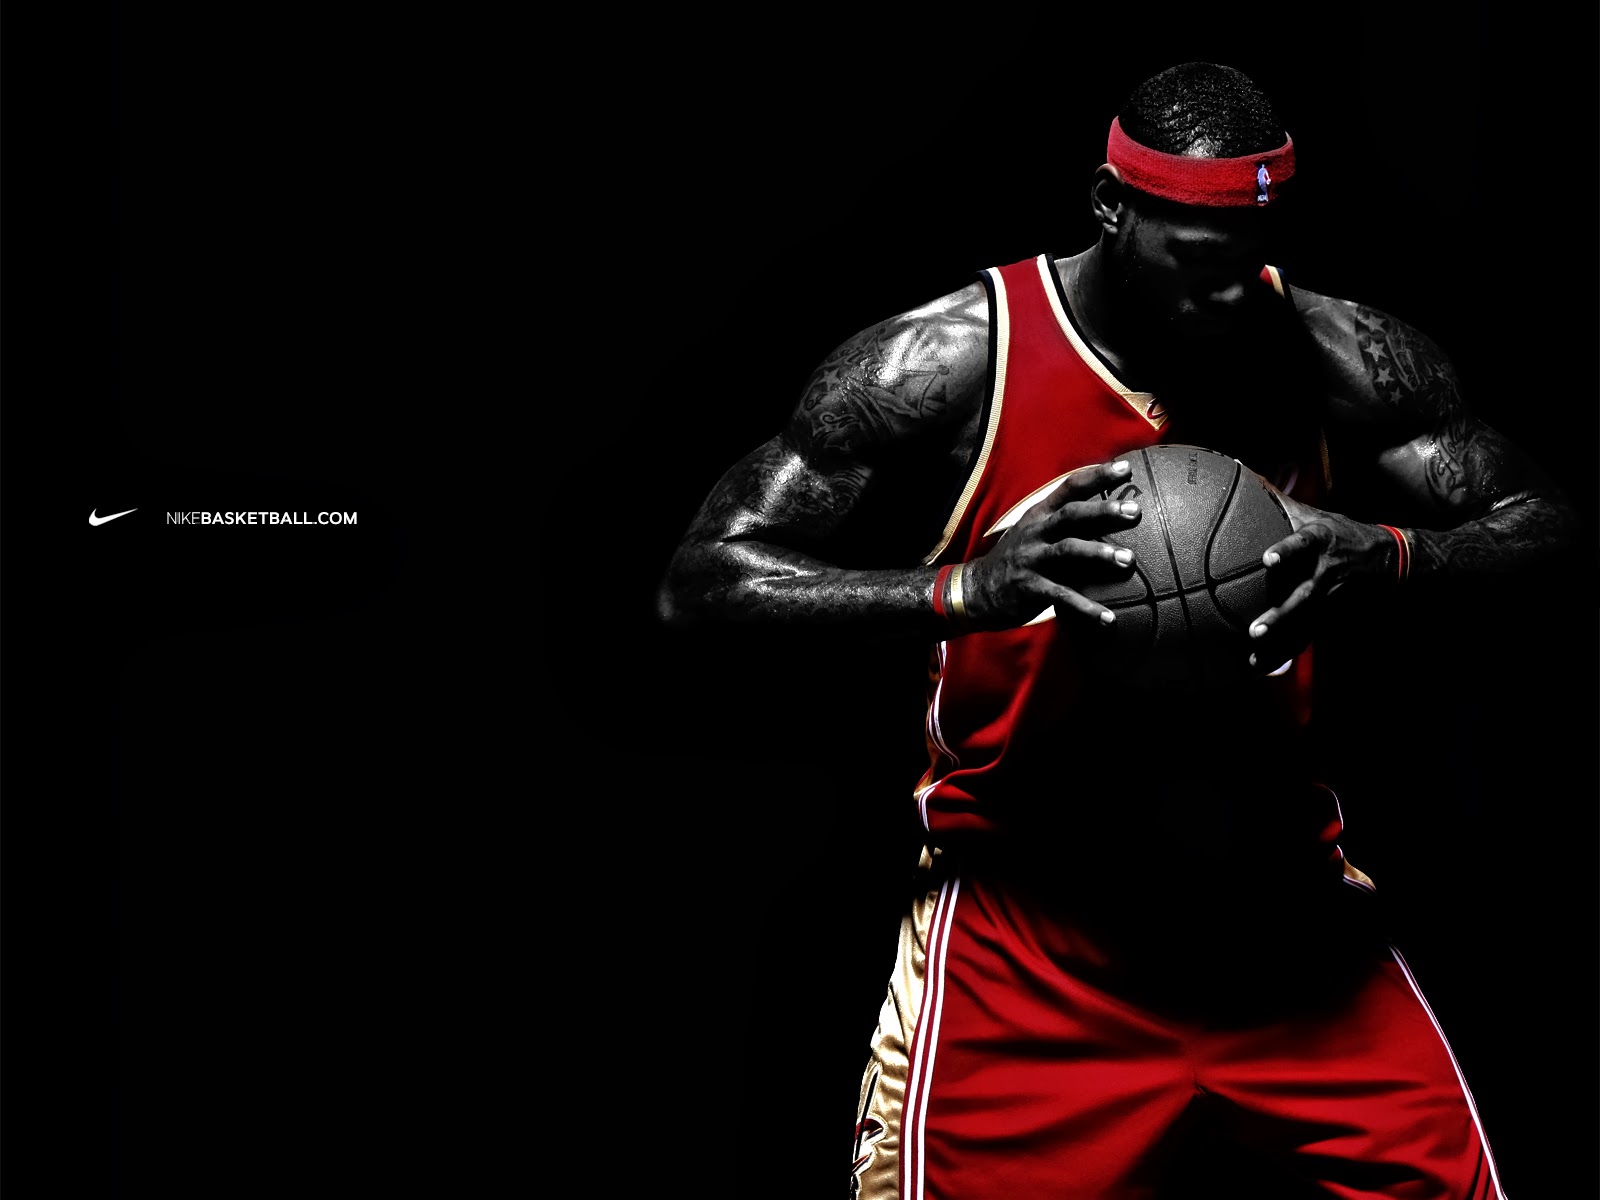 Lebron James HD Wallpapers | HDWallpapers360.com - High Definition ...